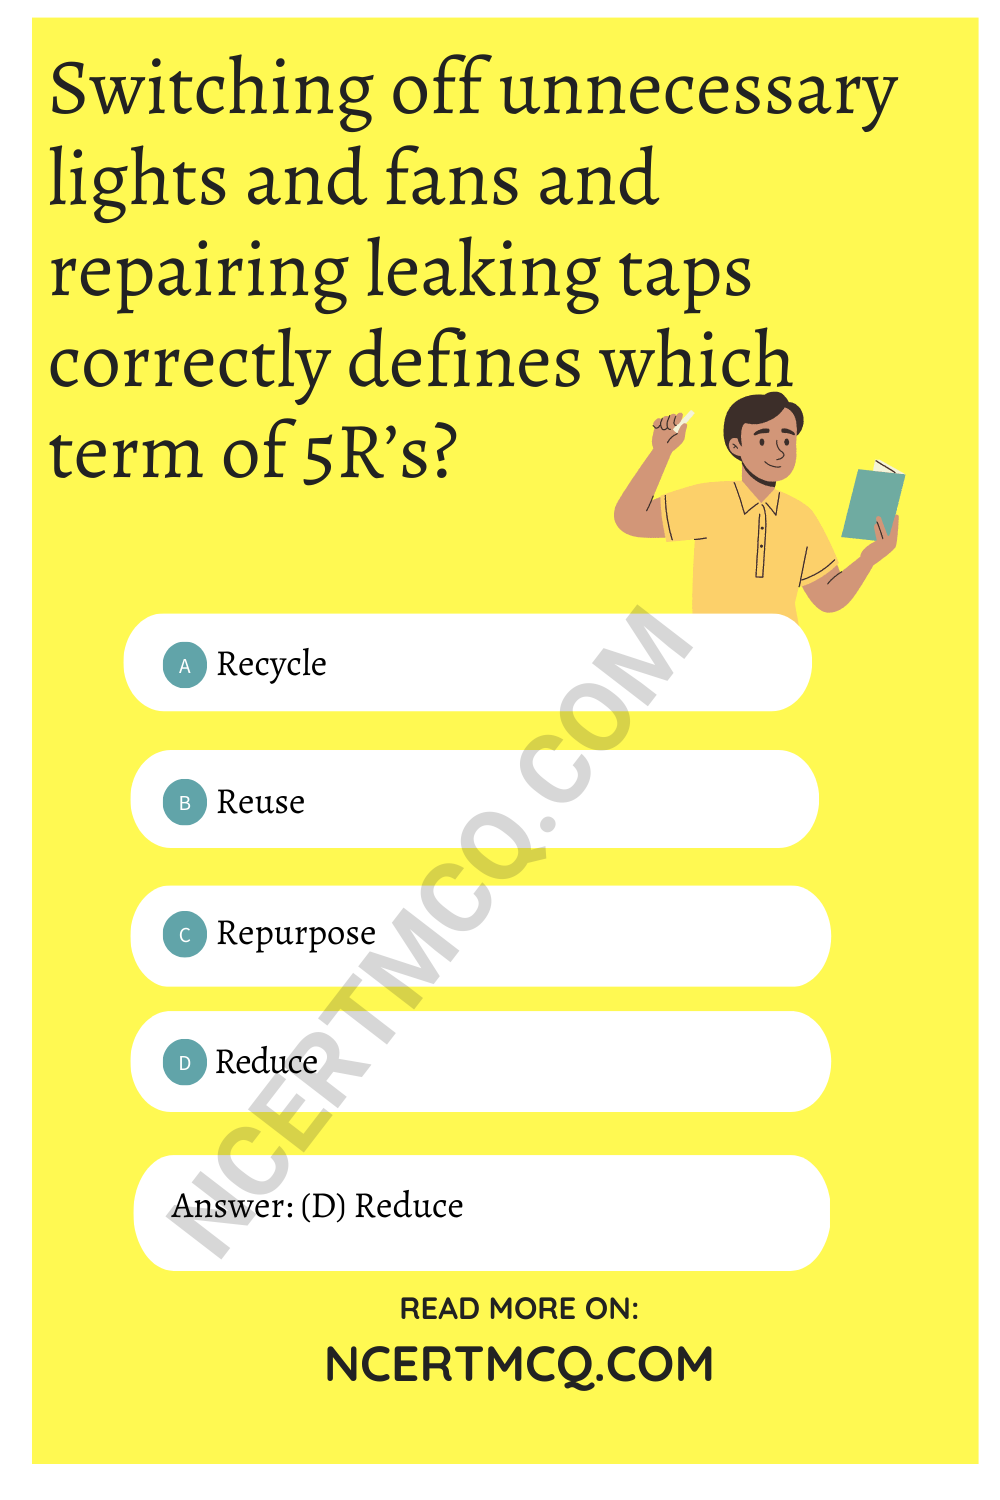 Switching off unnecessary lights and fans and repairing leaking taps correctly defines which term of 5R’s?